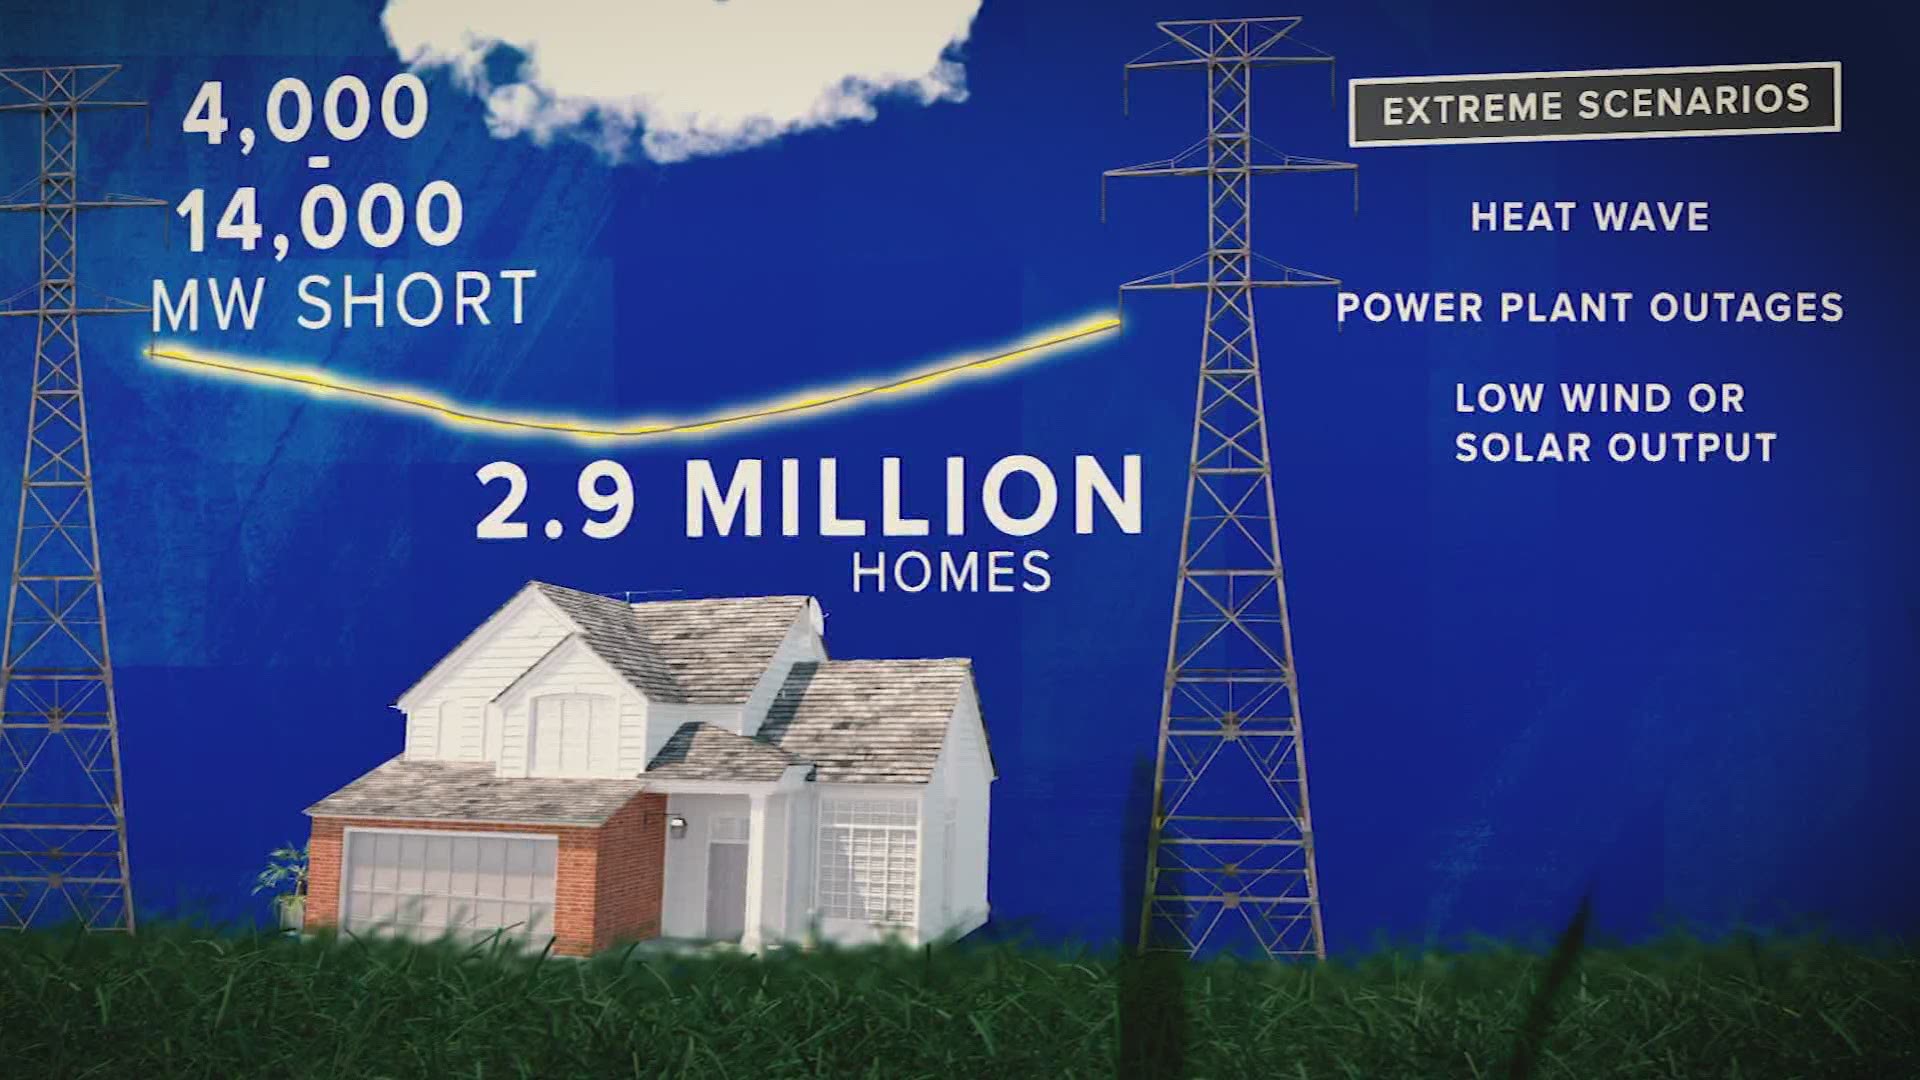 ERCOT's final summer forecast predicts there will be enough power supply to keep the power on this summer, but if conditions aren't normal, the grid could fail.